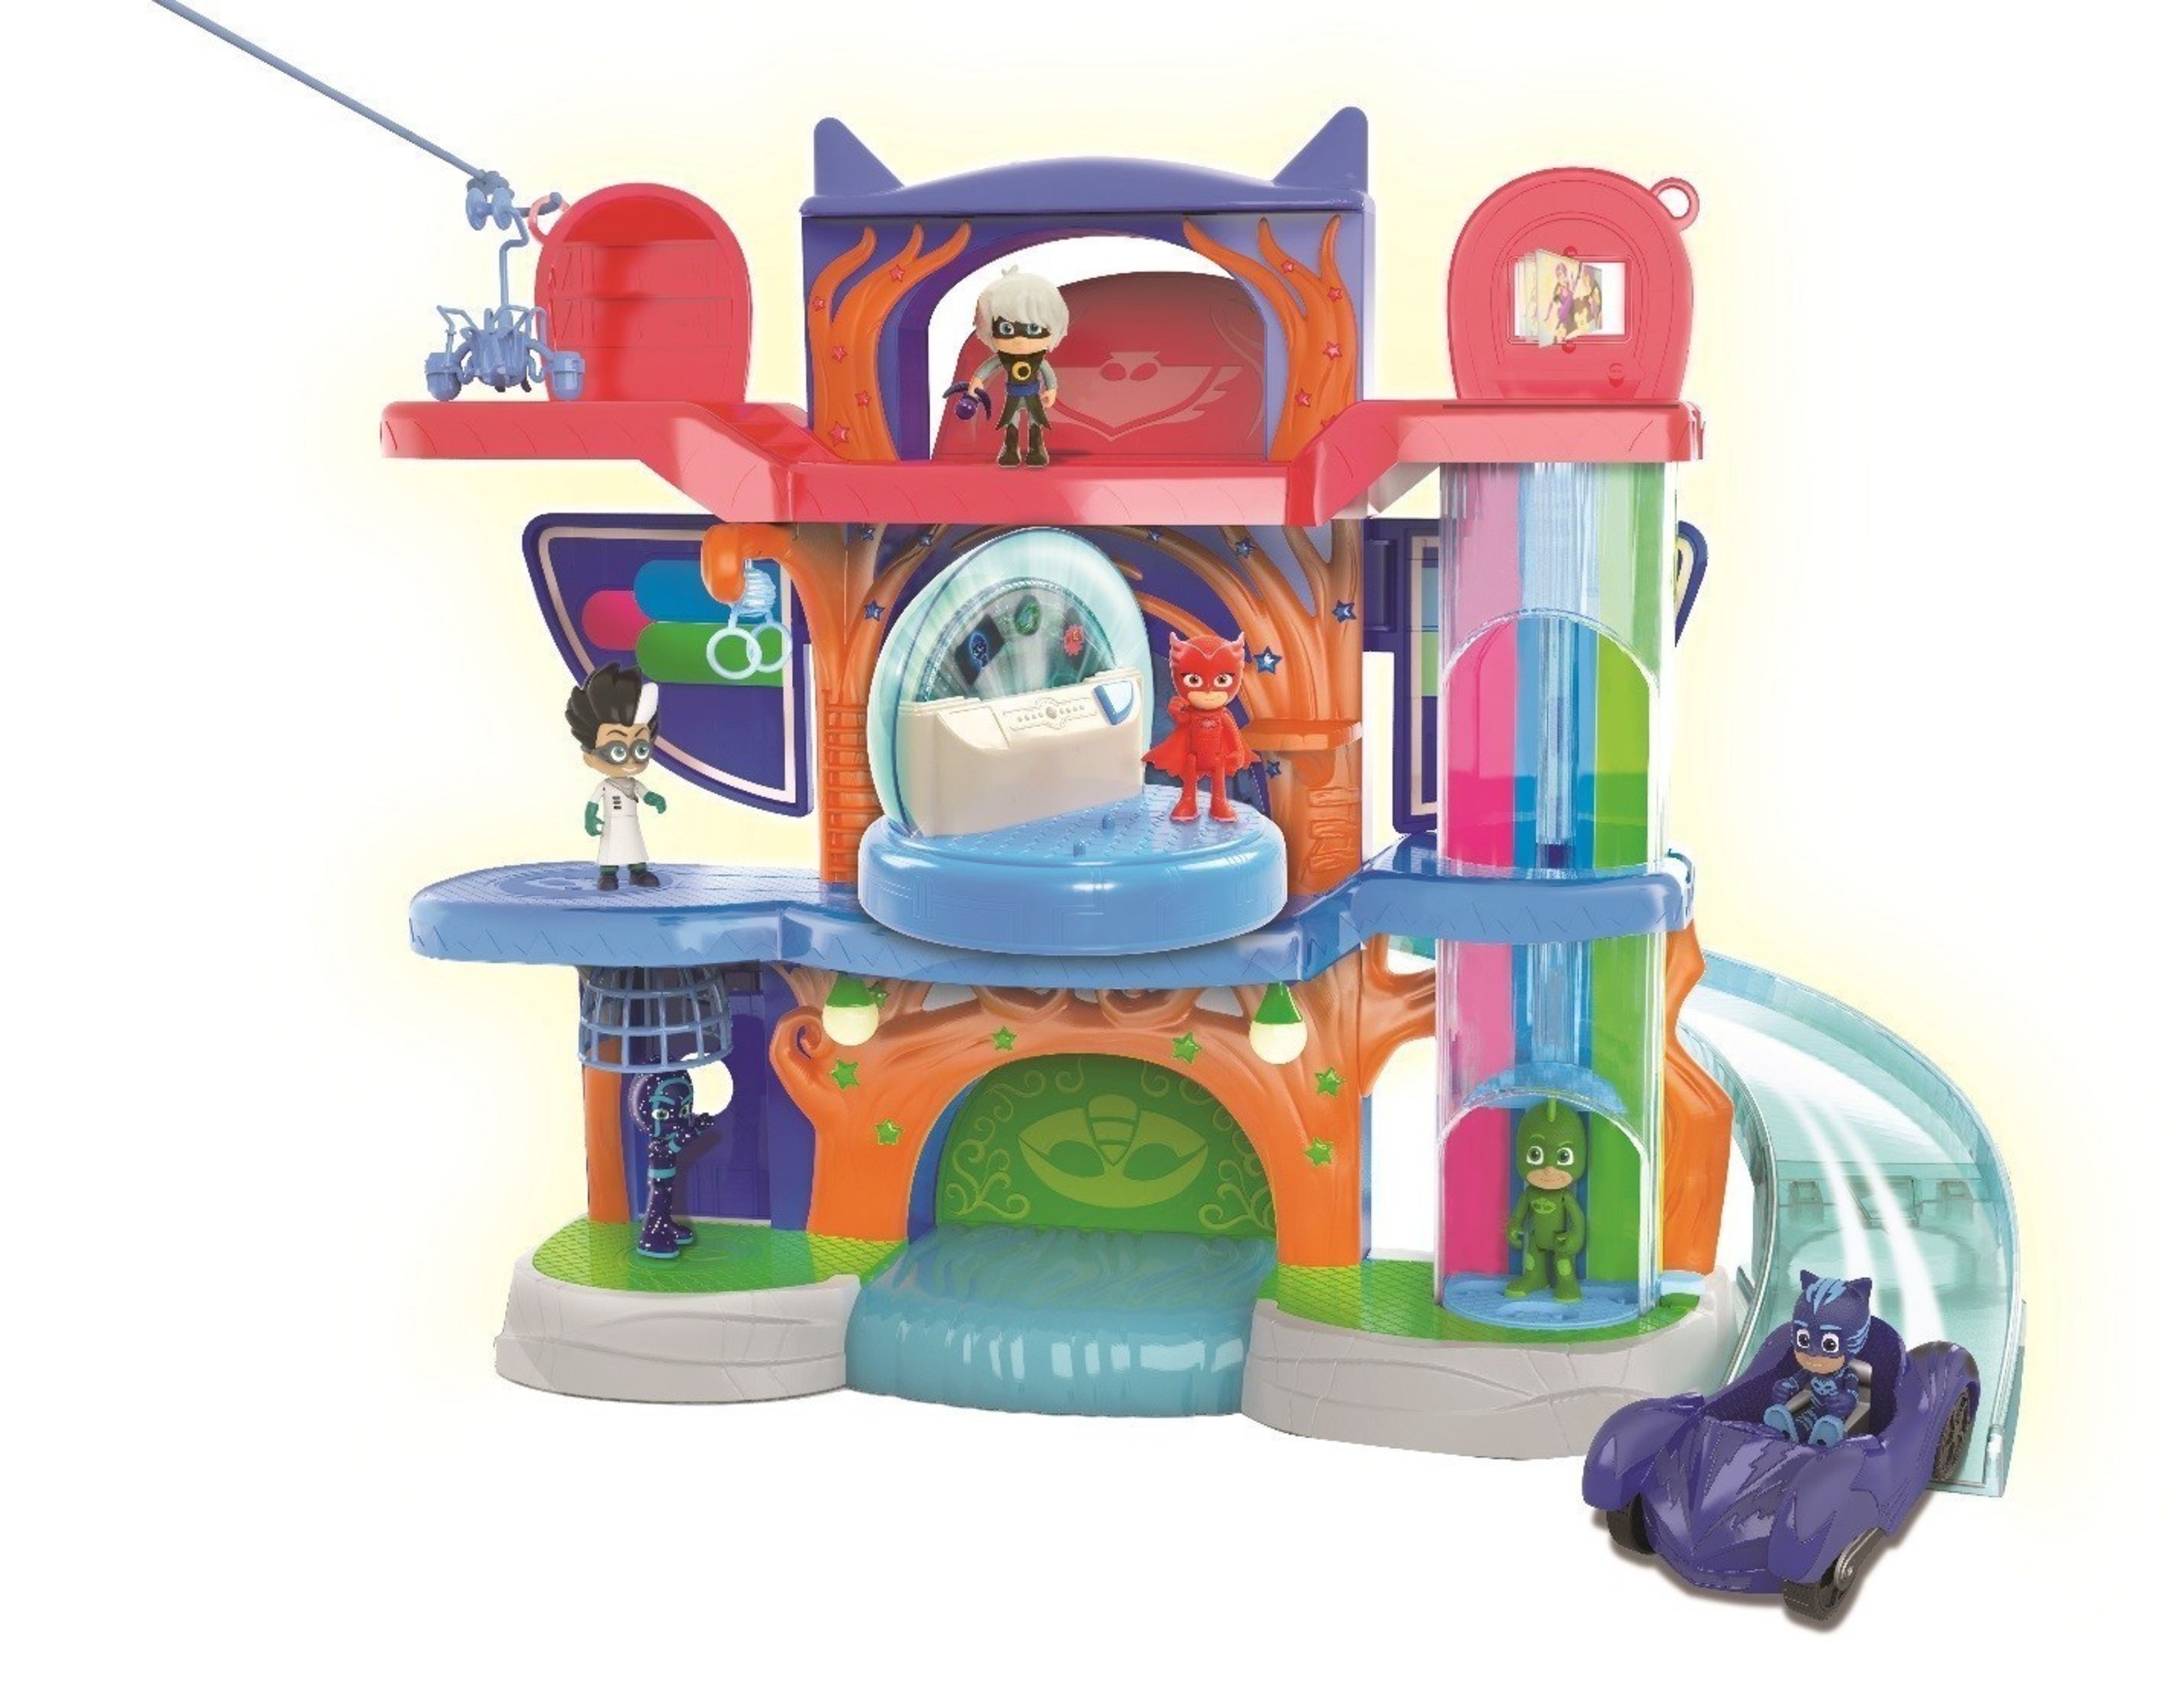 PJ Masks Headquarters Playset from Just Play(TM)